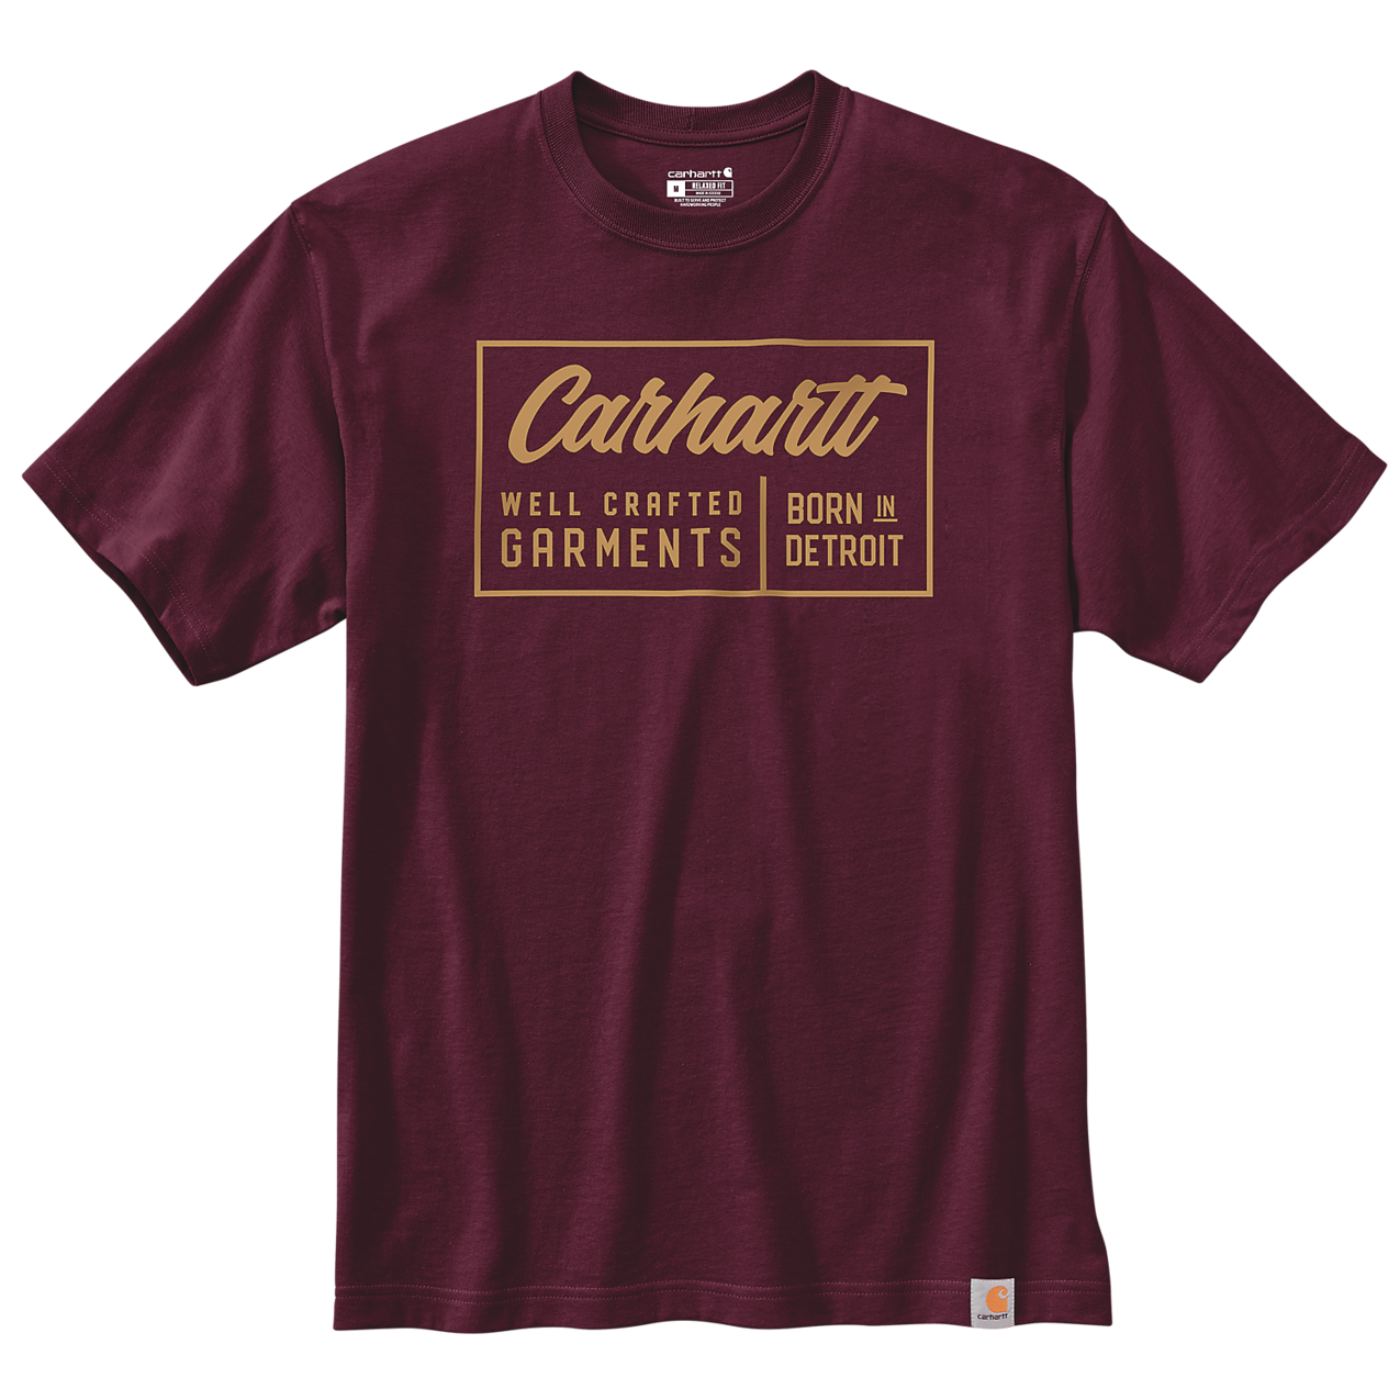 T-Shirt Crafted Graphic Carhartt